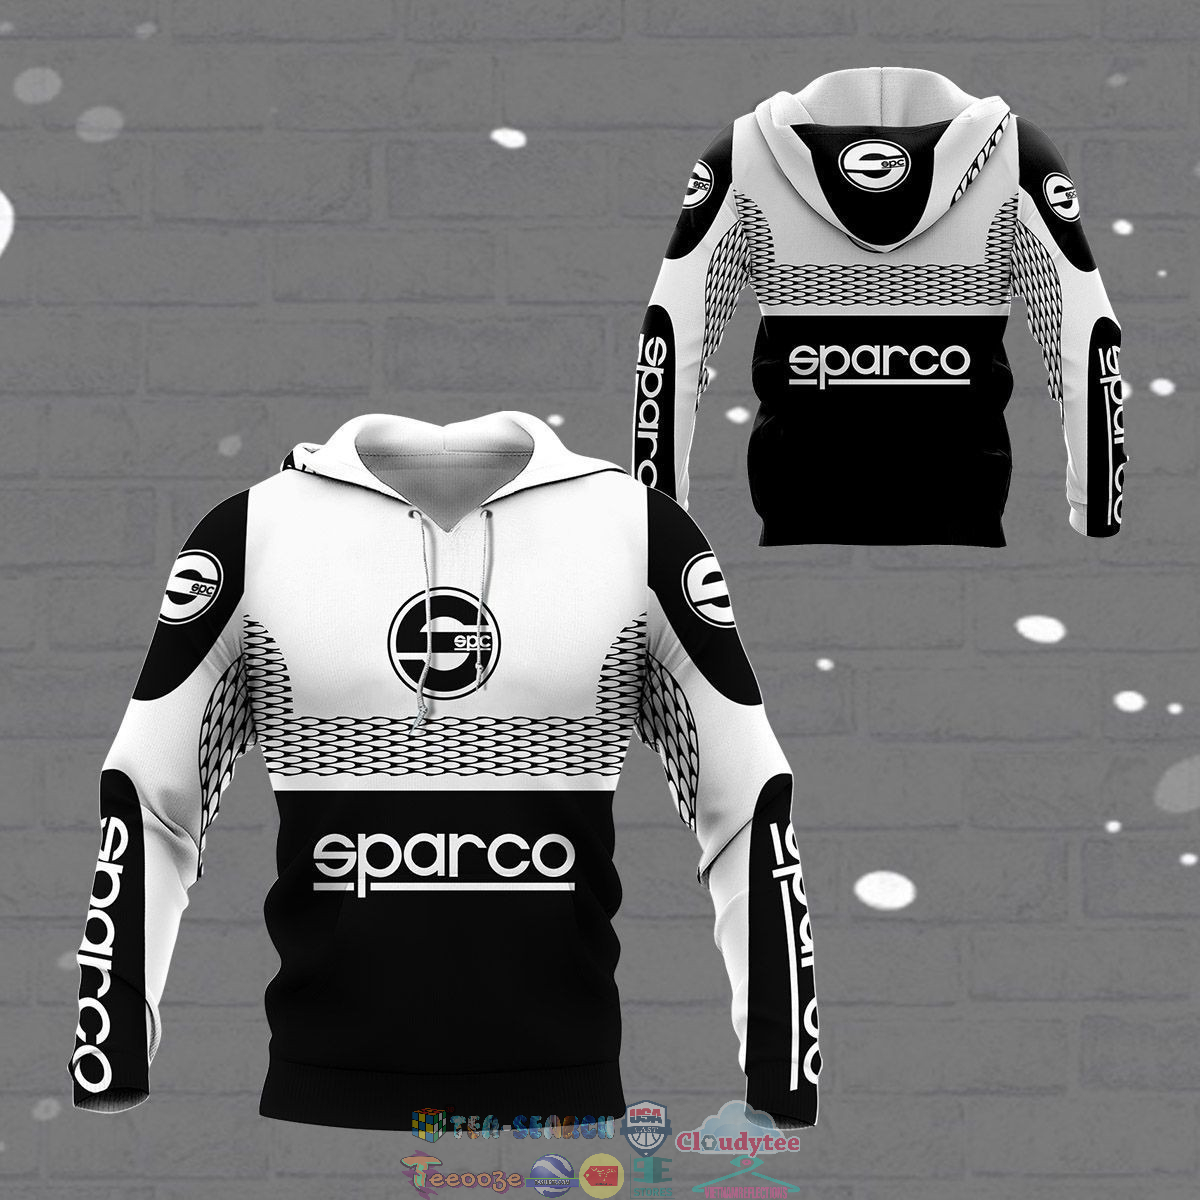 Sparco ver 6 3D hoodie and t-shirt